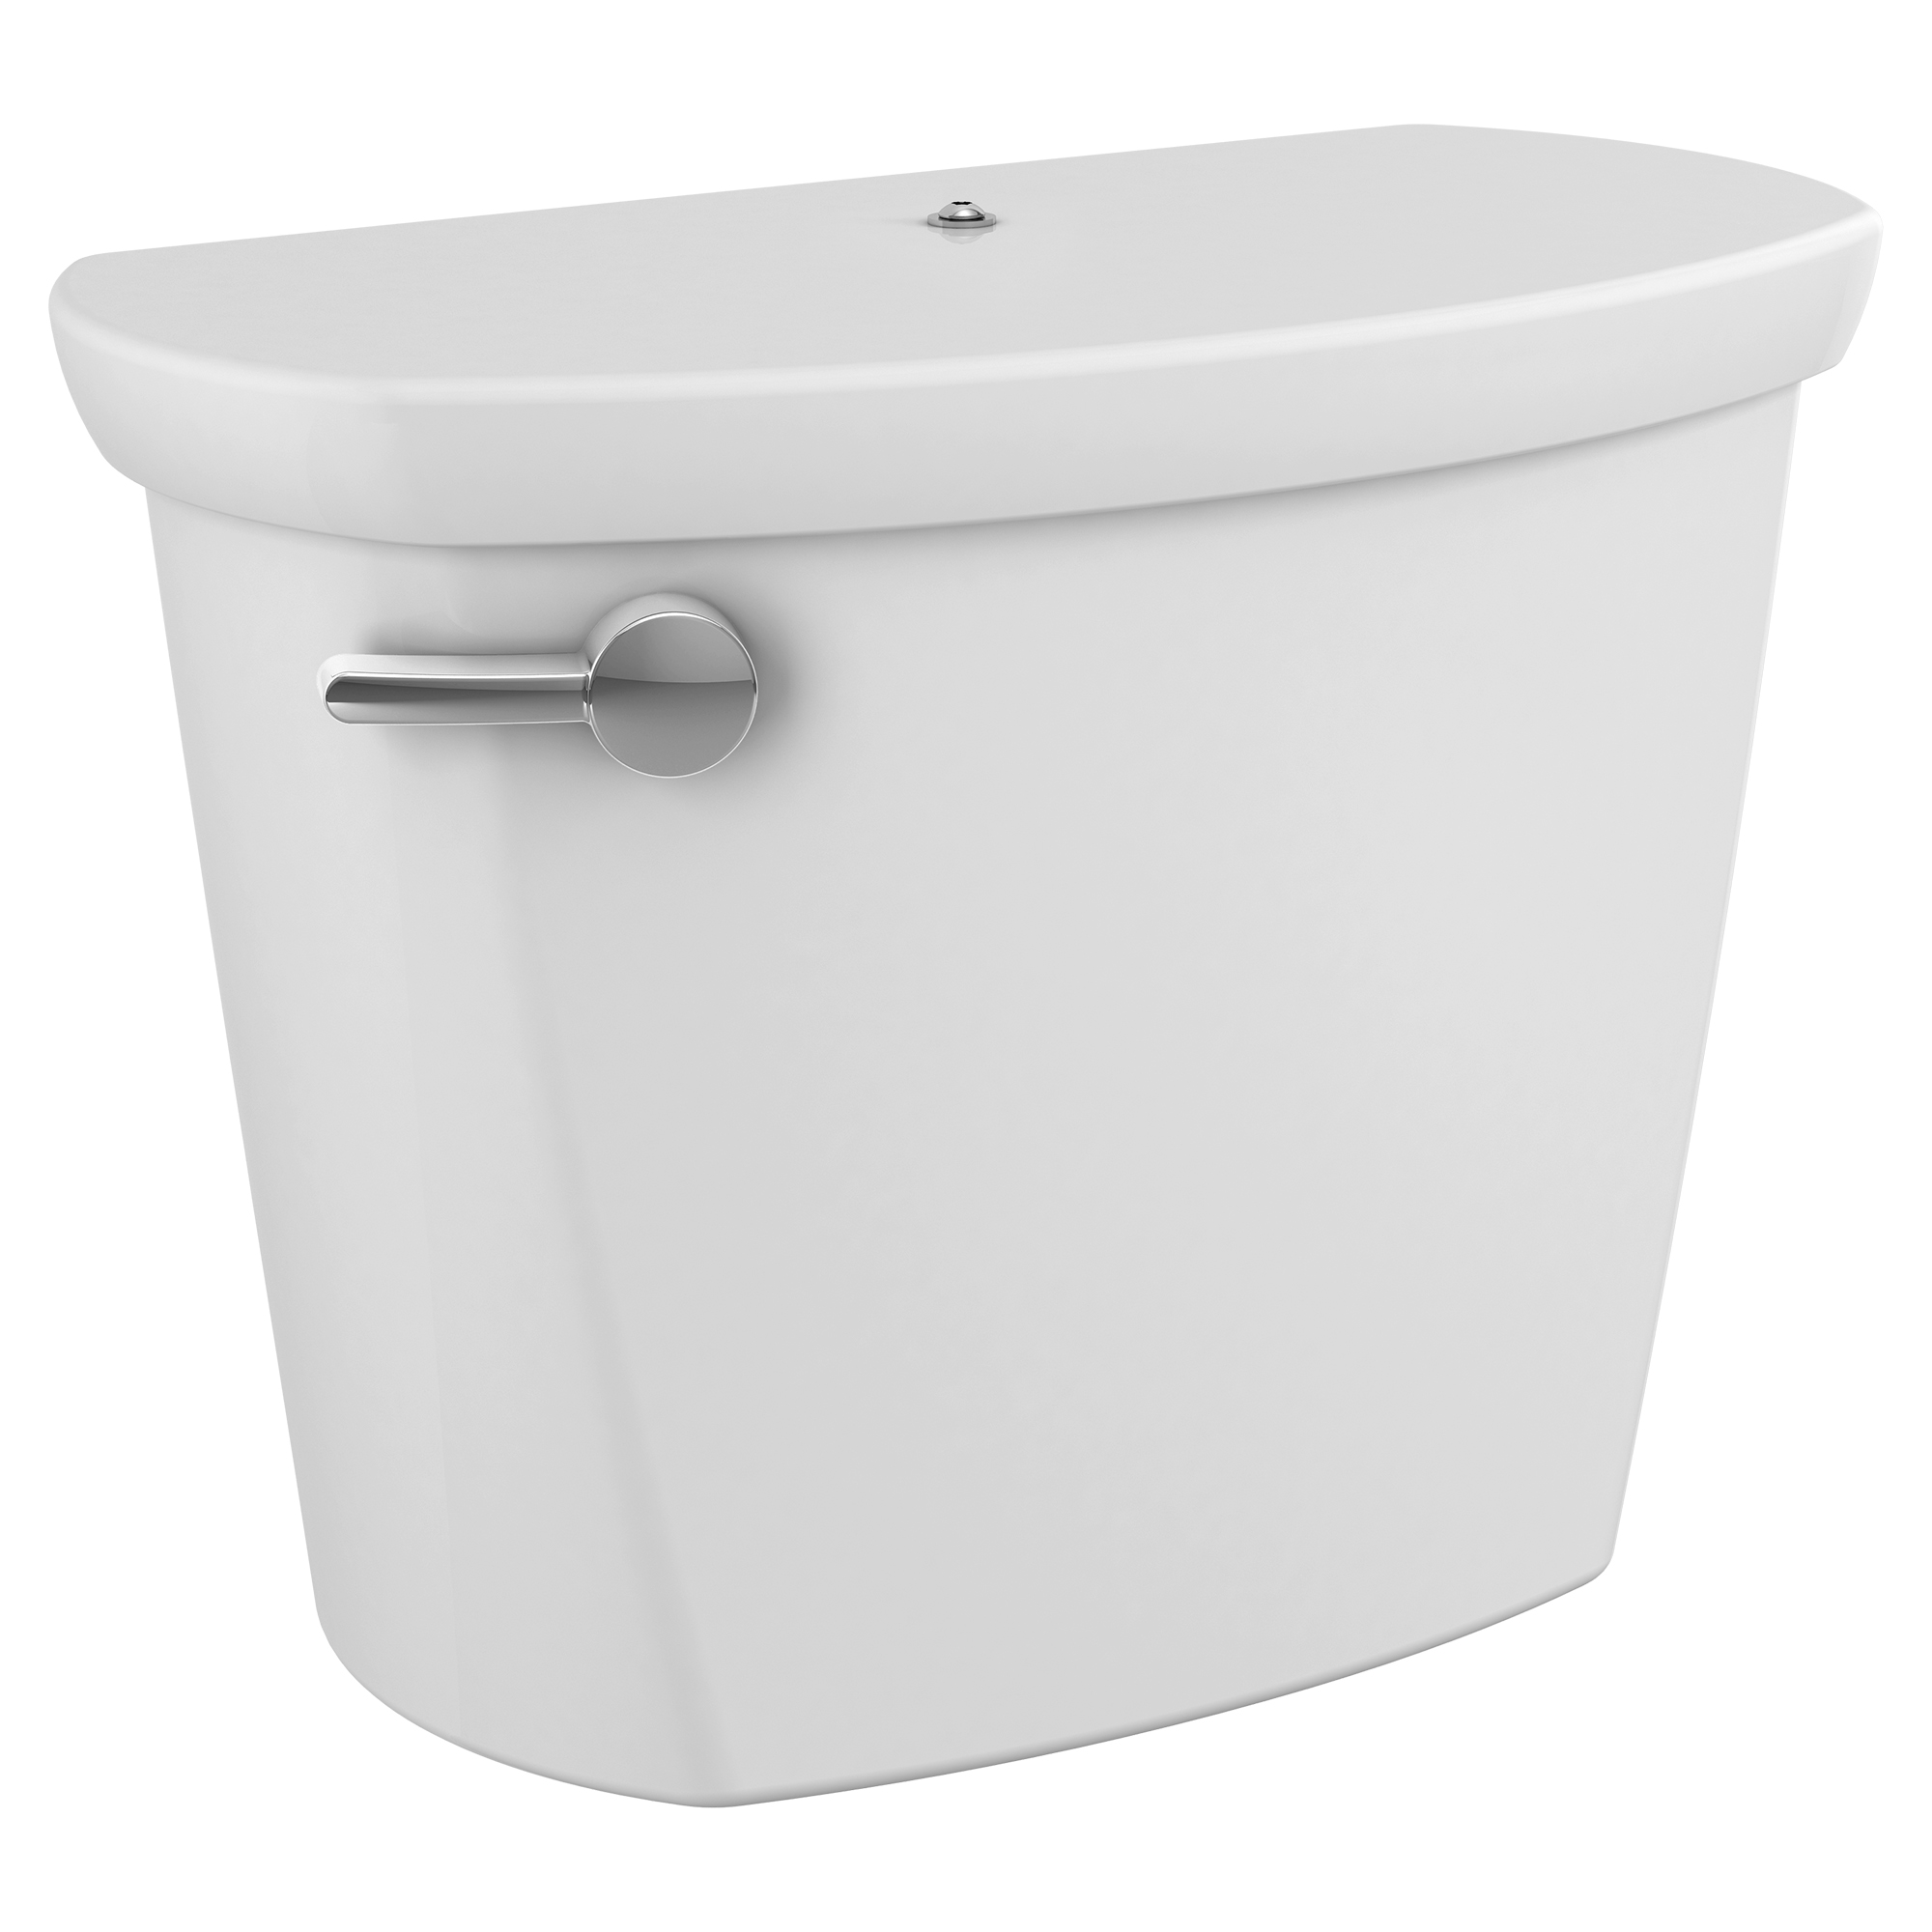 Cadet® PRO 1.6 gpf/6.0 Lpf 12-Inch Toilet Tank with Tank Cover Locking Device